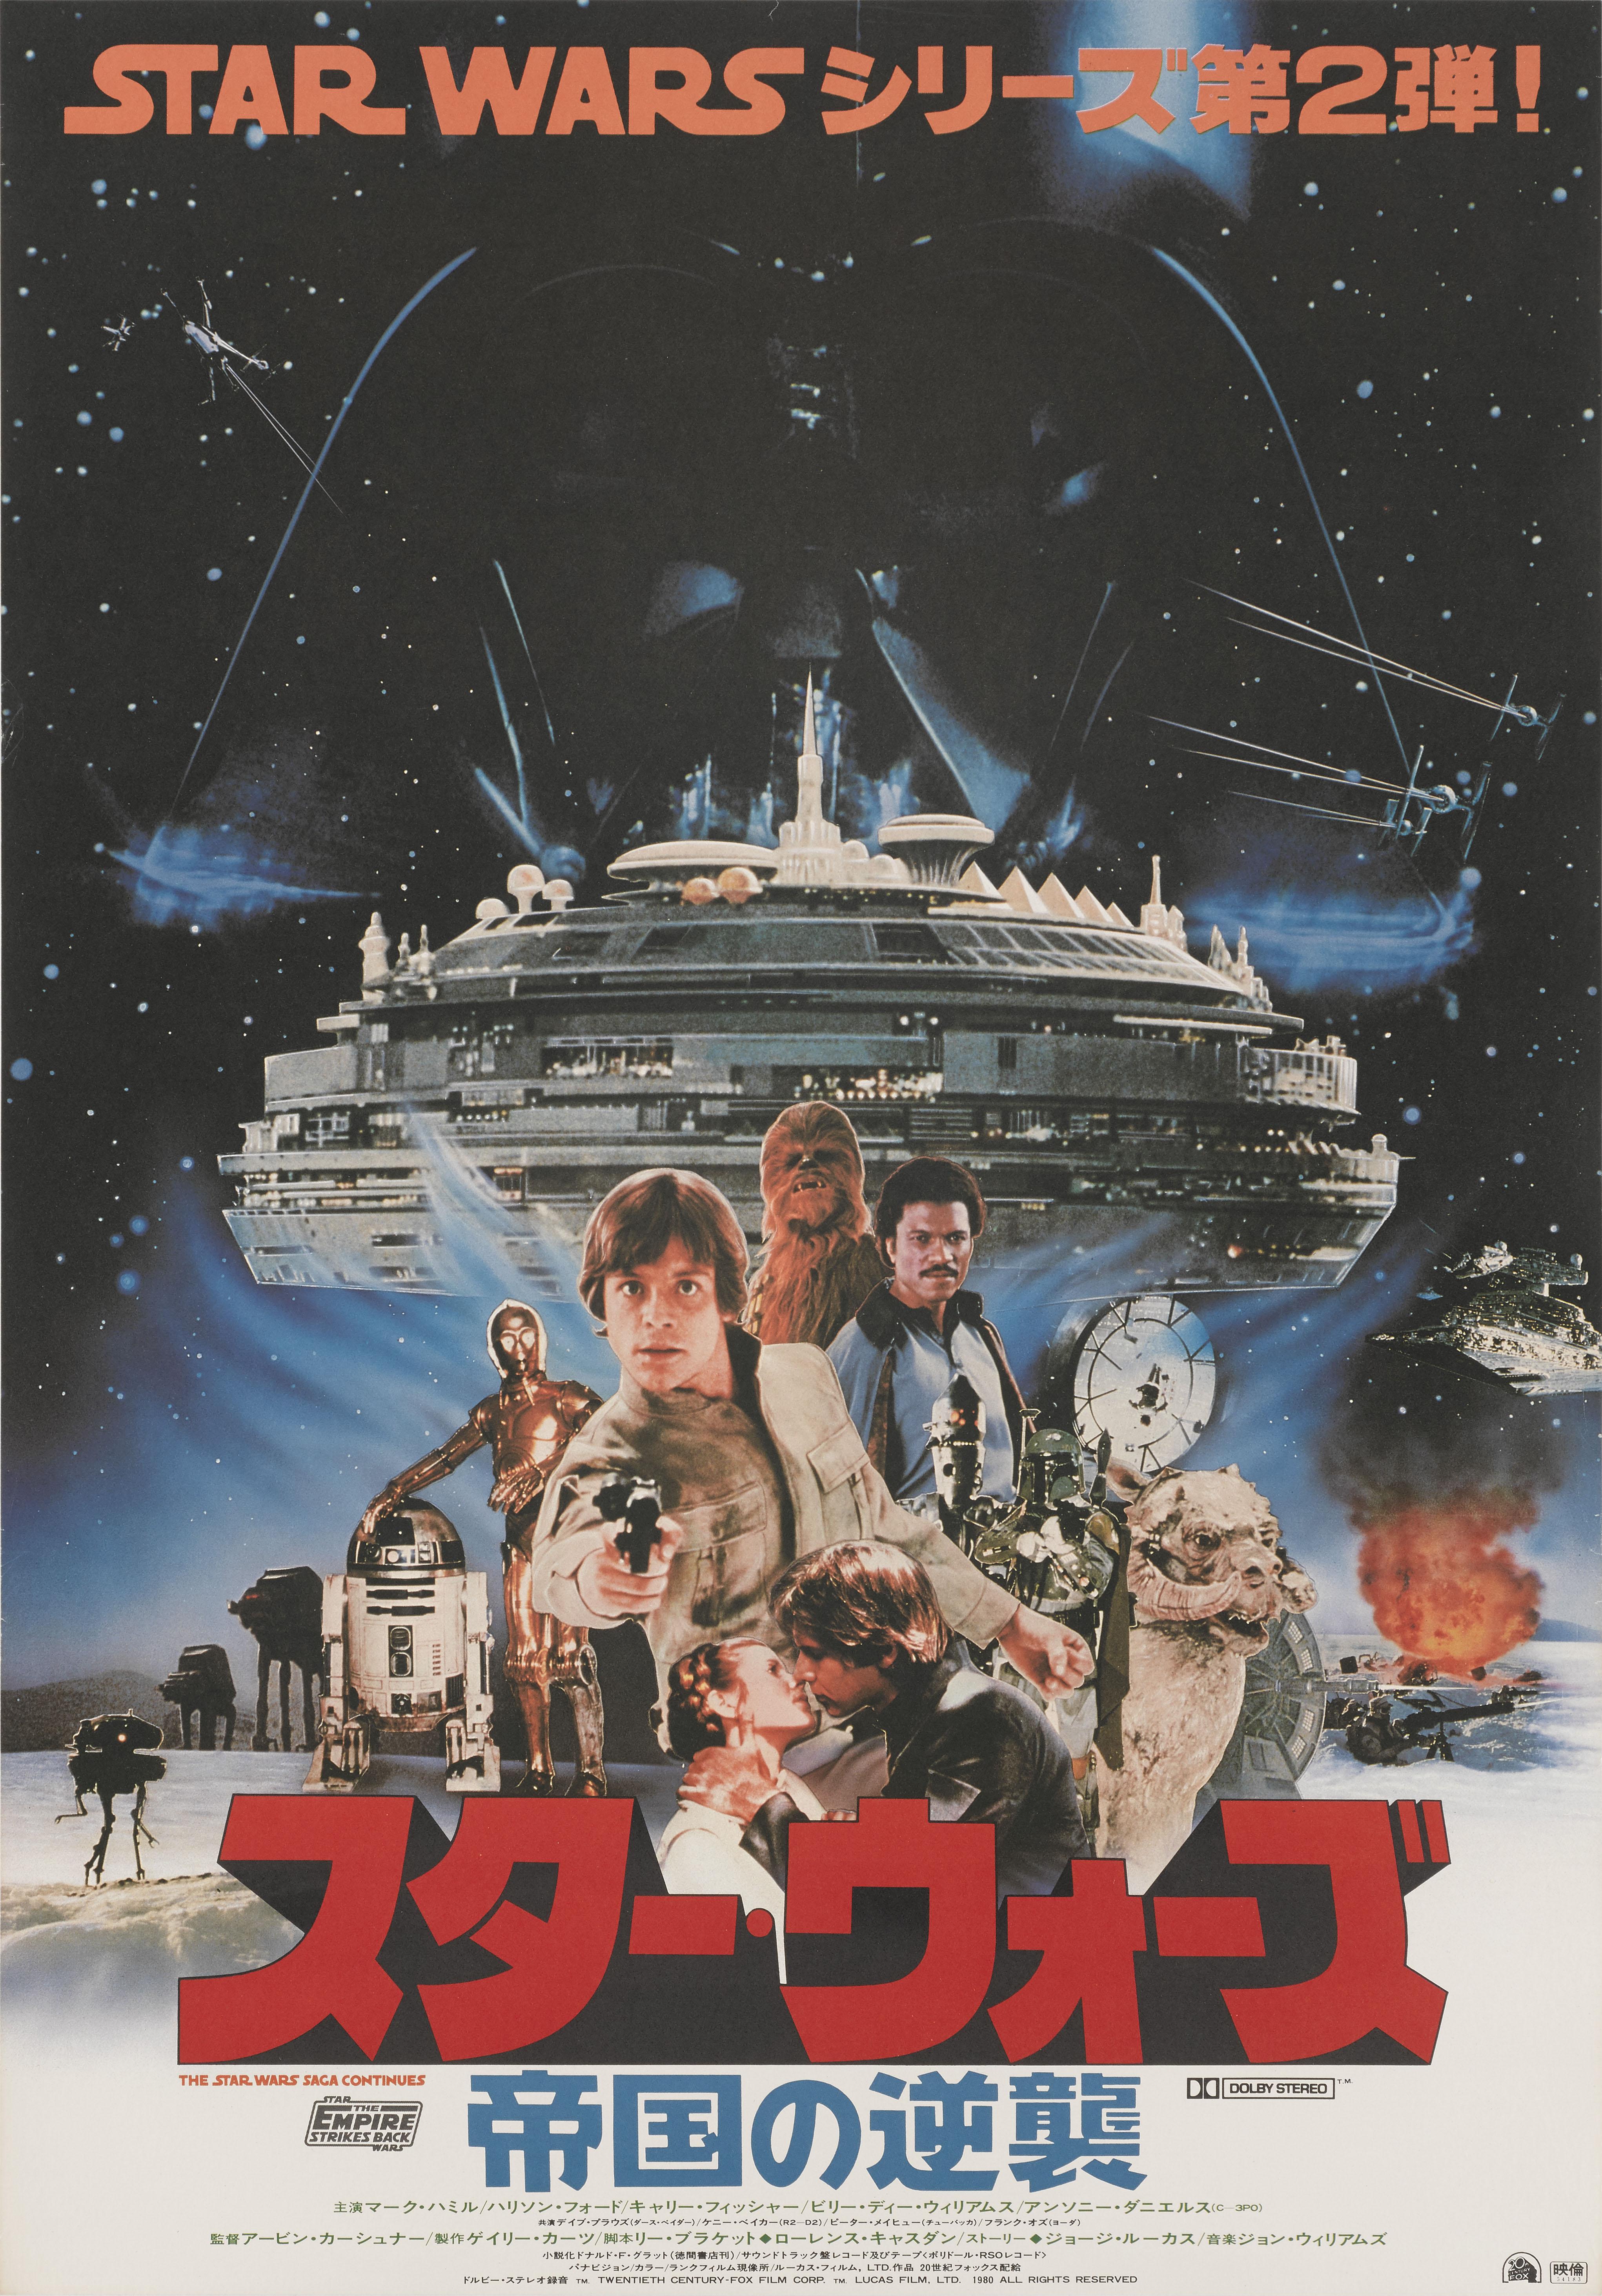 Original Japanese film poster for The Empire Strikes Back also known as (Star Wars: Episode V, The Empire Strikes Back) this was the second movie in the Star Wars saga staring Mark Hamill, Harrison Ford, Carrie Fisher and Billy Dee Williams. The